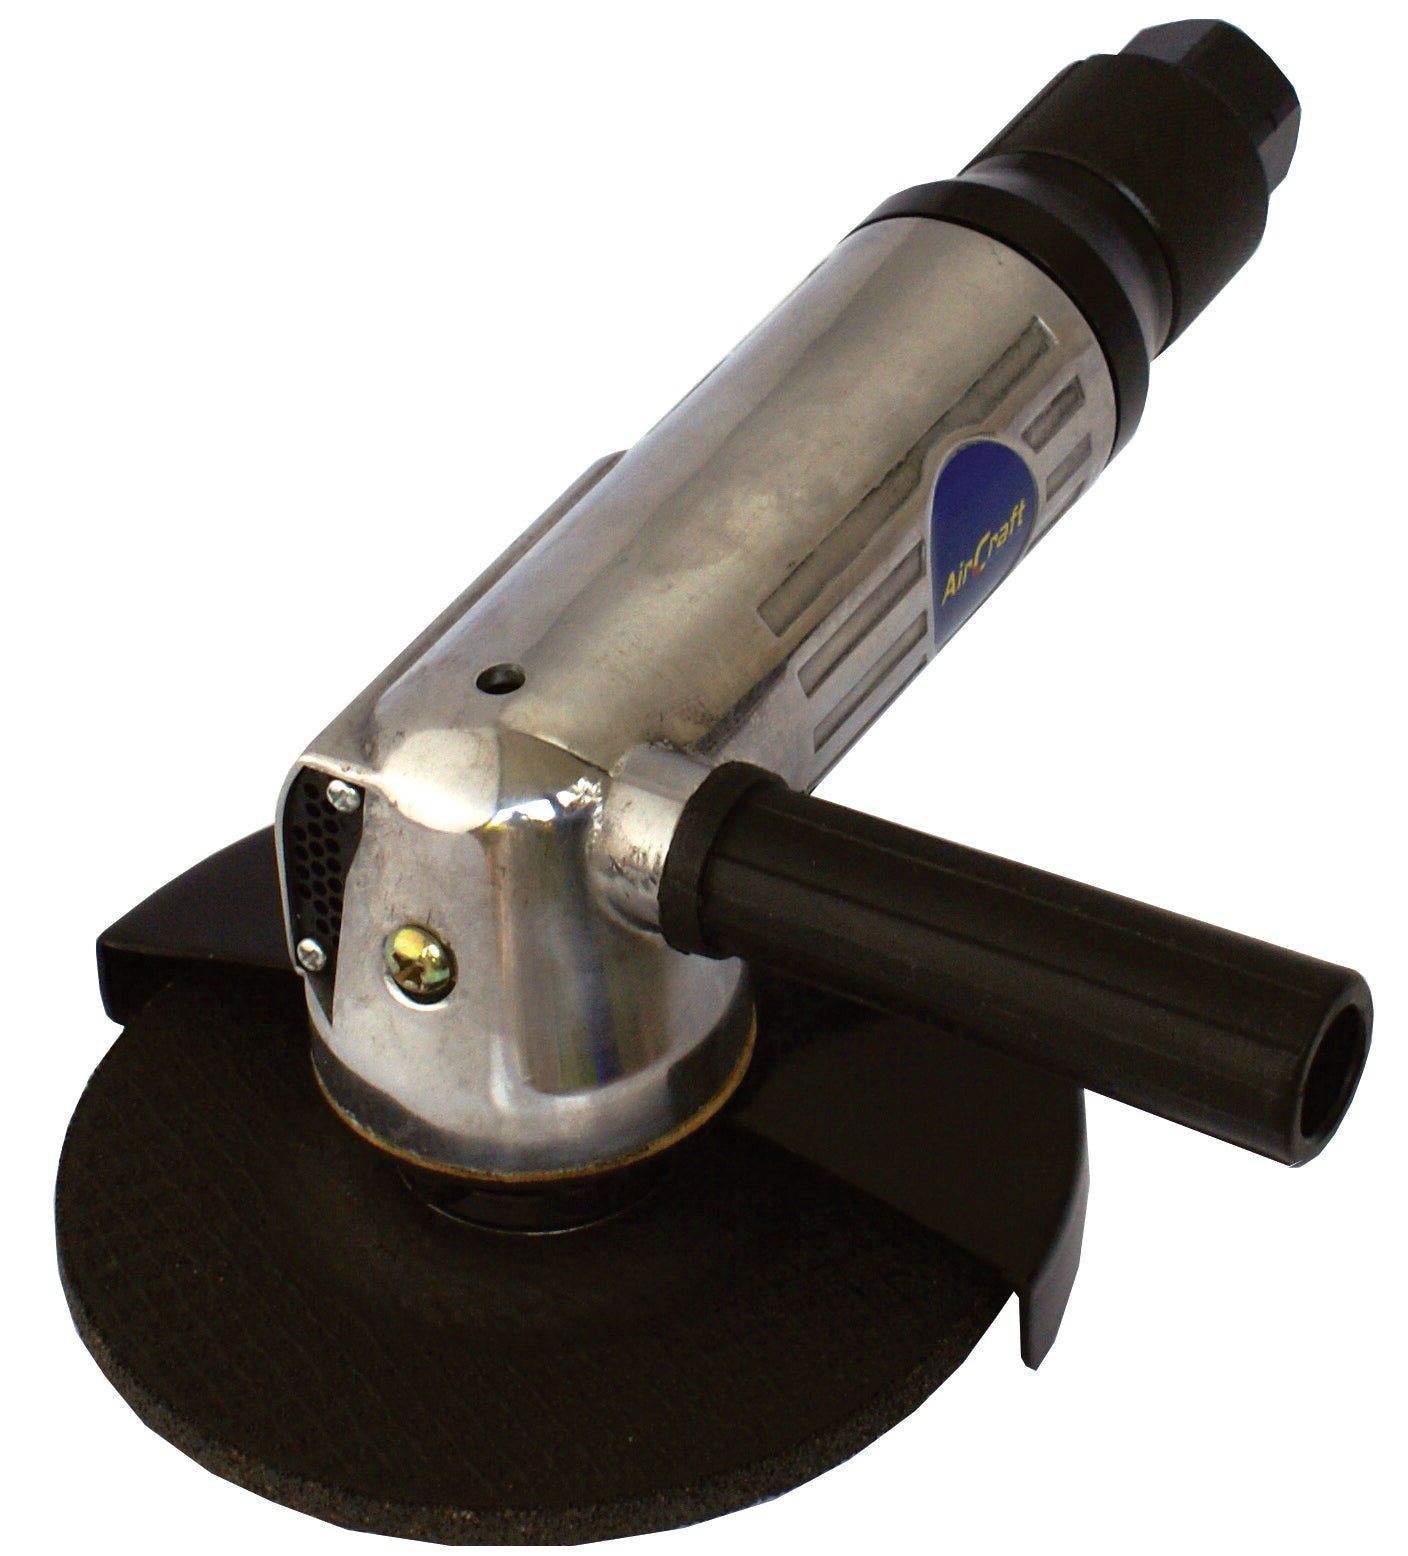 aircraft-air-angle-grinder-125mm-with-safety-trigger-at0013-2